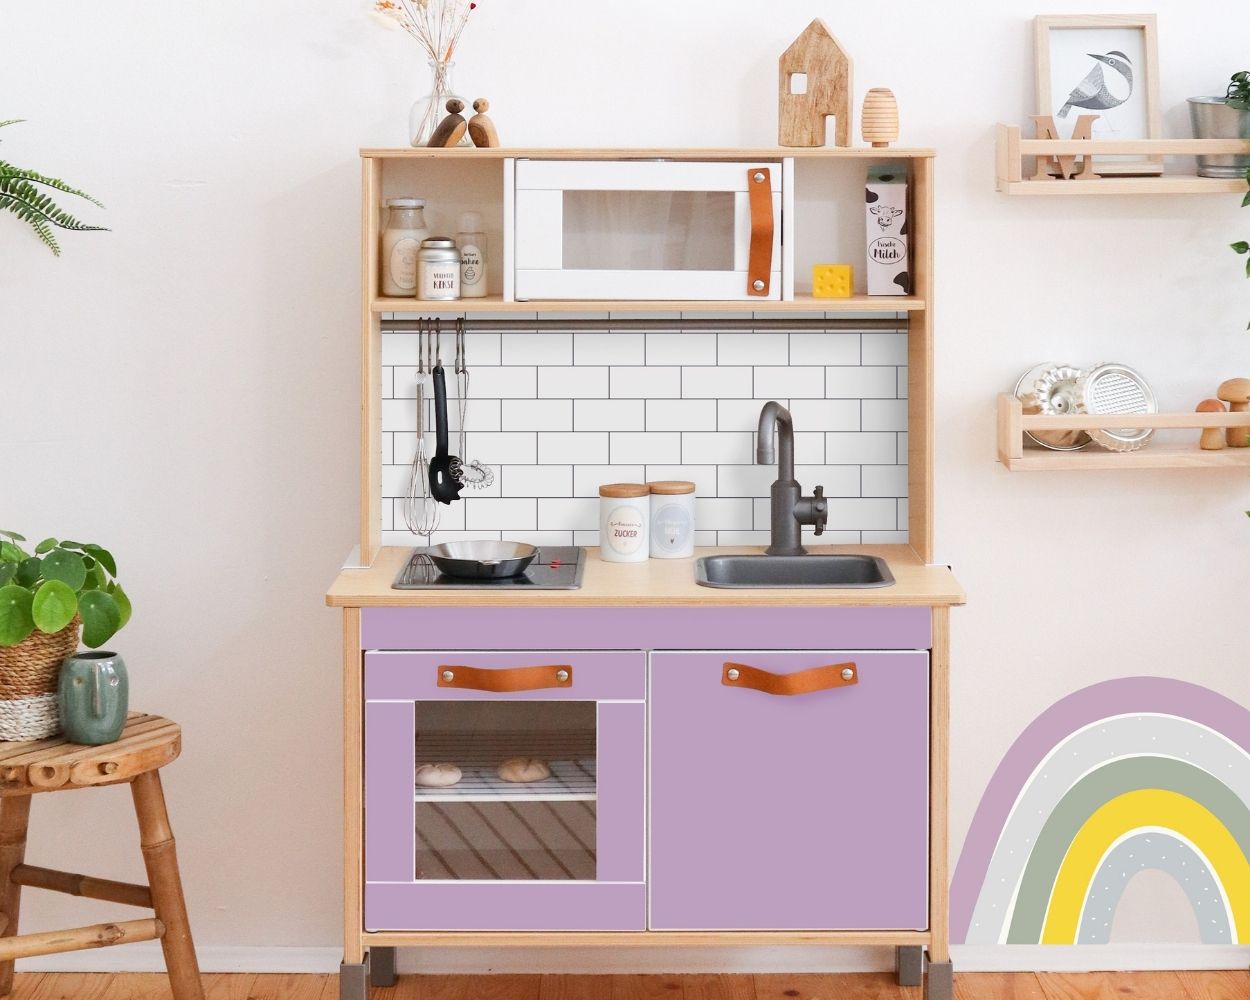 The most beautiful children's kitchen combinations